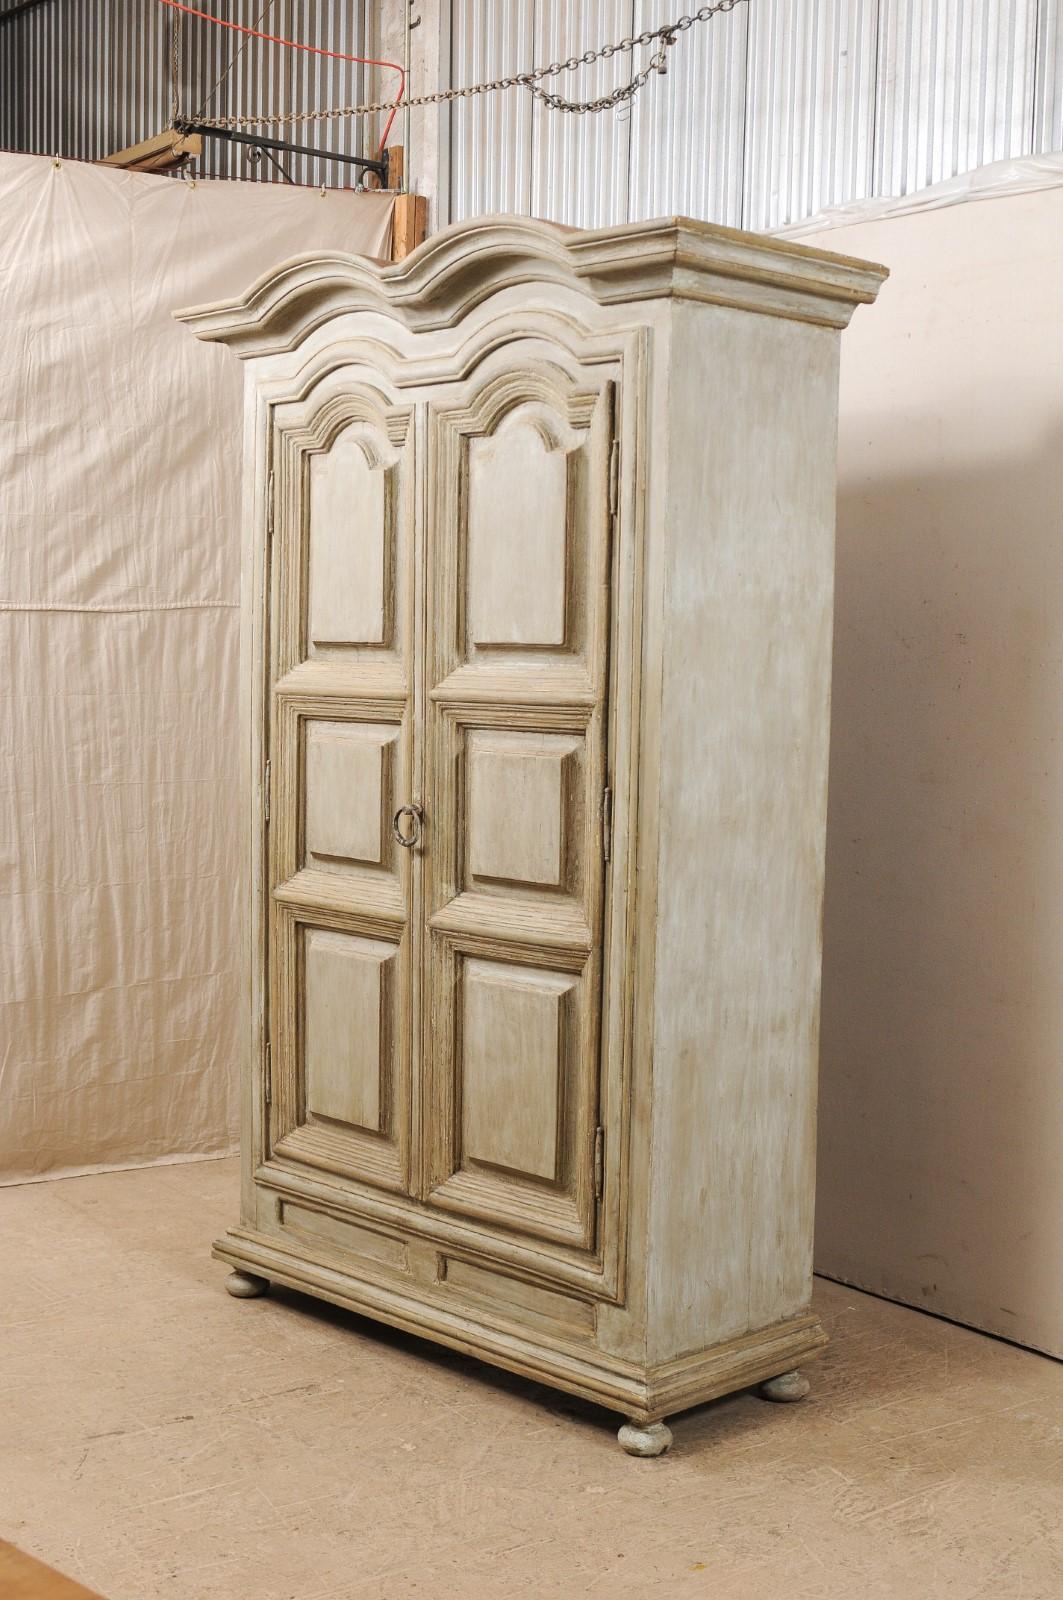 Carved Large-Sized Brazilian Two-Door Storage Cabinet w/ Scalloped Crest, Mid-20th C.